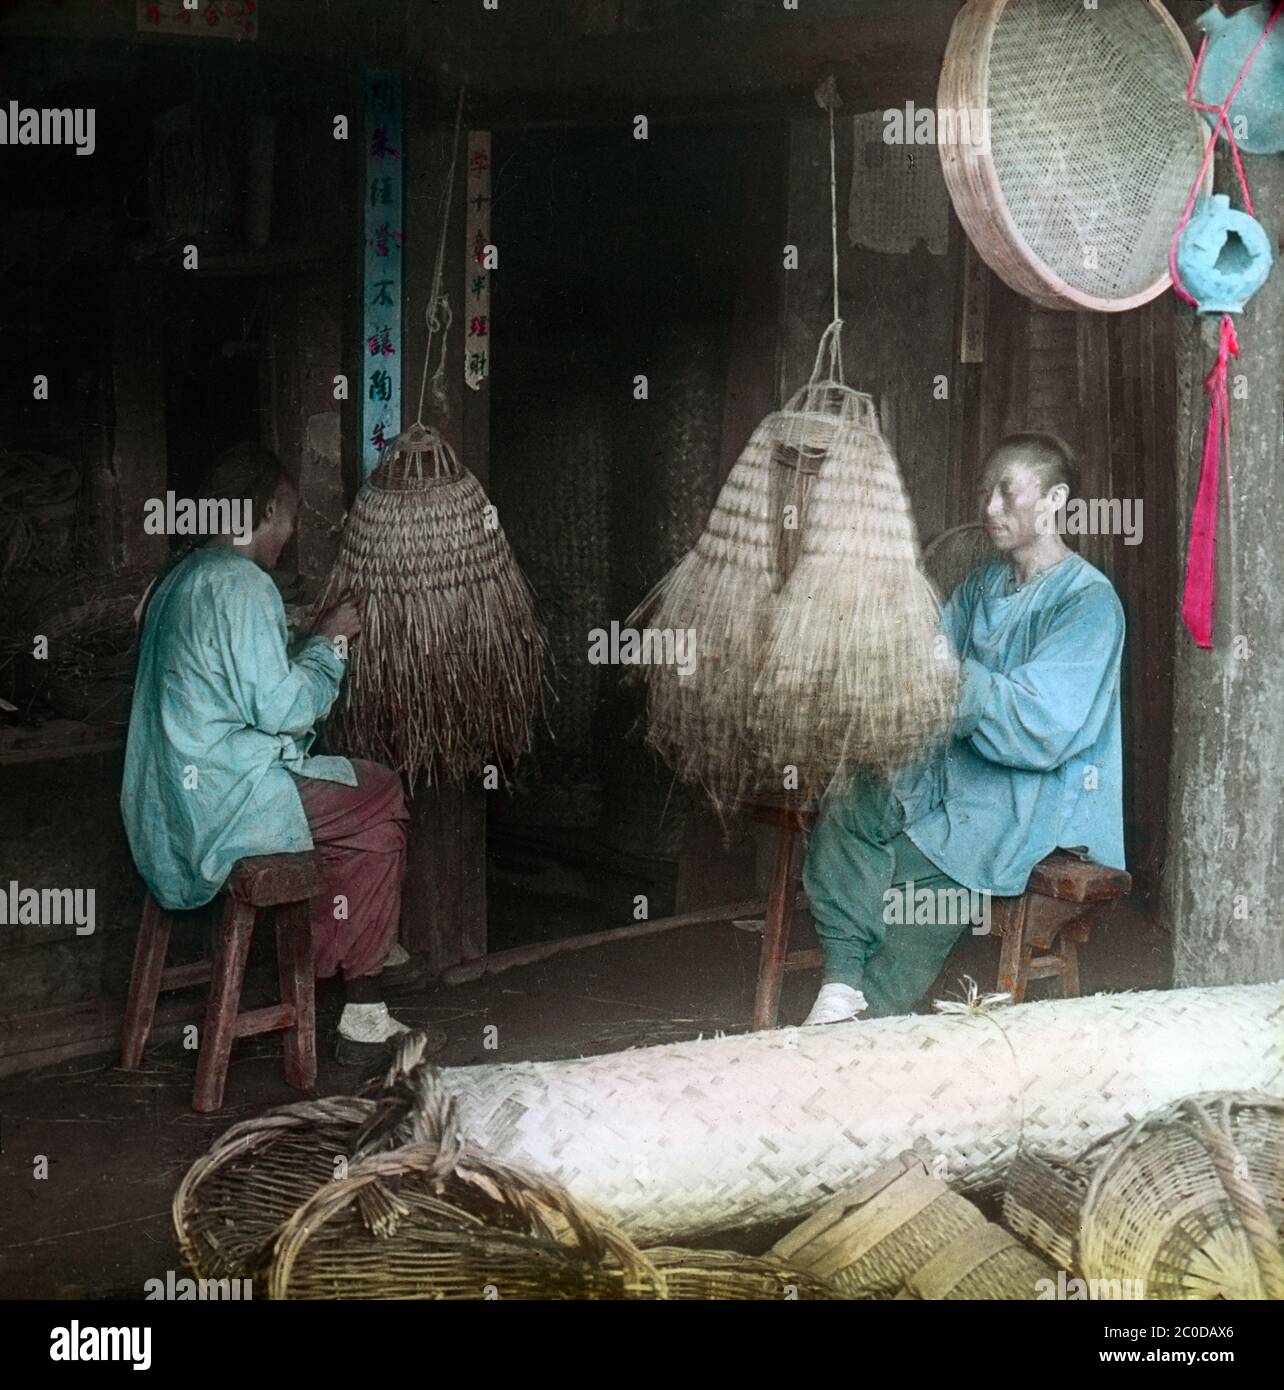 [ 1900s Japan - Chinese Artisans ] — Chinese artisans making straw rain coats in Mukden, Manchuria during the Russo-Japanese War (1904-1905).  The Battle of Mukden (奉天会戦, Hoten kaisen) was fought between Japanese and Russian forces between February 20  and March 10, 1905 (Meiji 38).  It was one of the largest land battles to be fought before World War I and the last and the most decisive major land battle of the Russo-Japanese War. The city is now called Shenyang. It is the capital of Liaoning province, China.  20th century vintage glass slide. Stock Photo